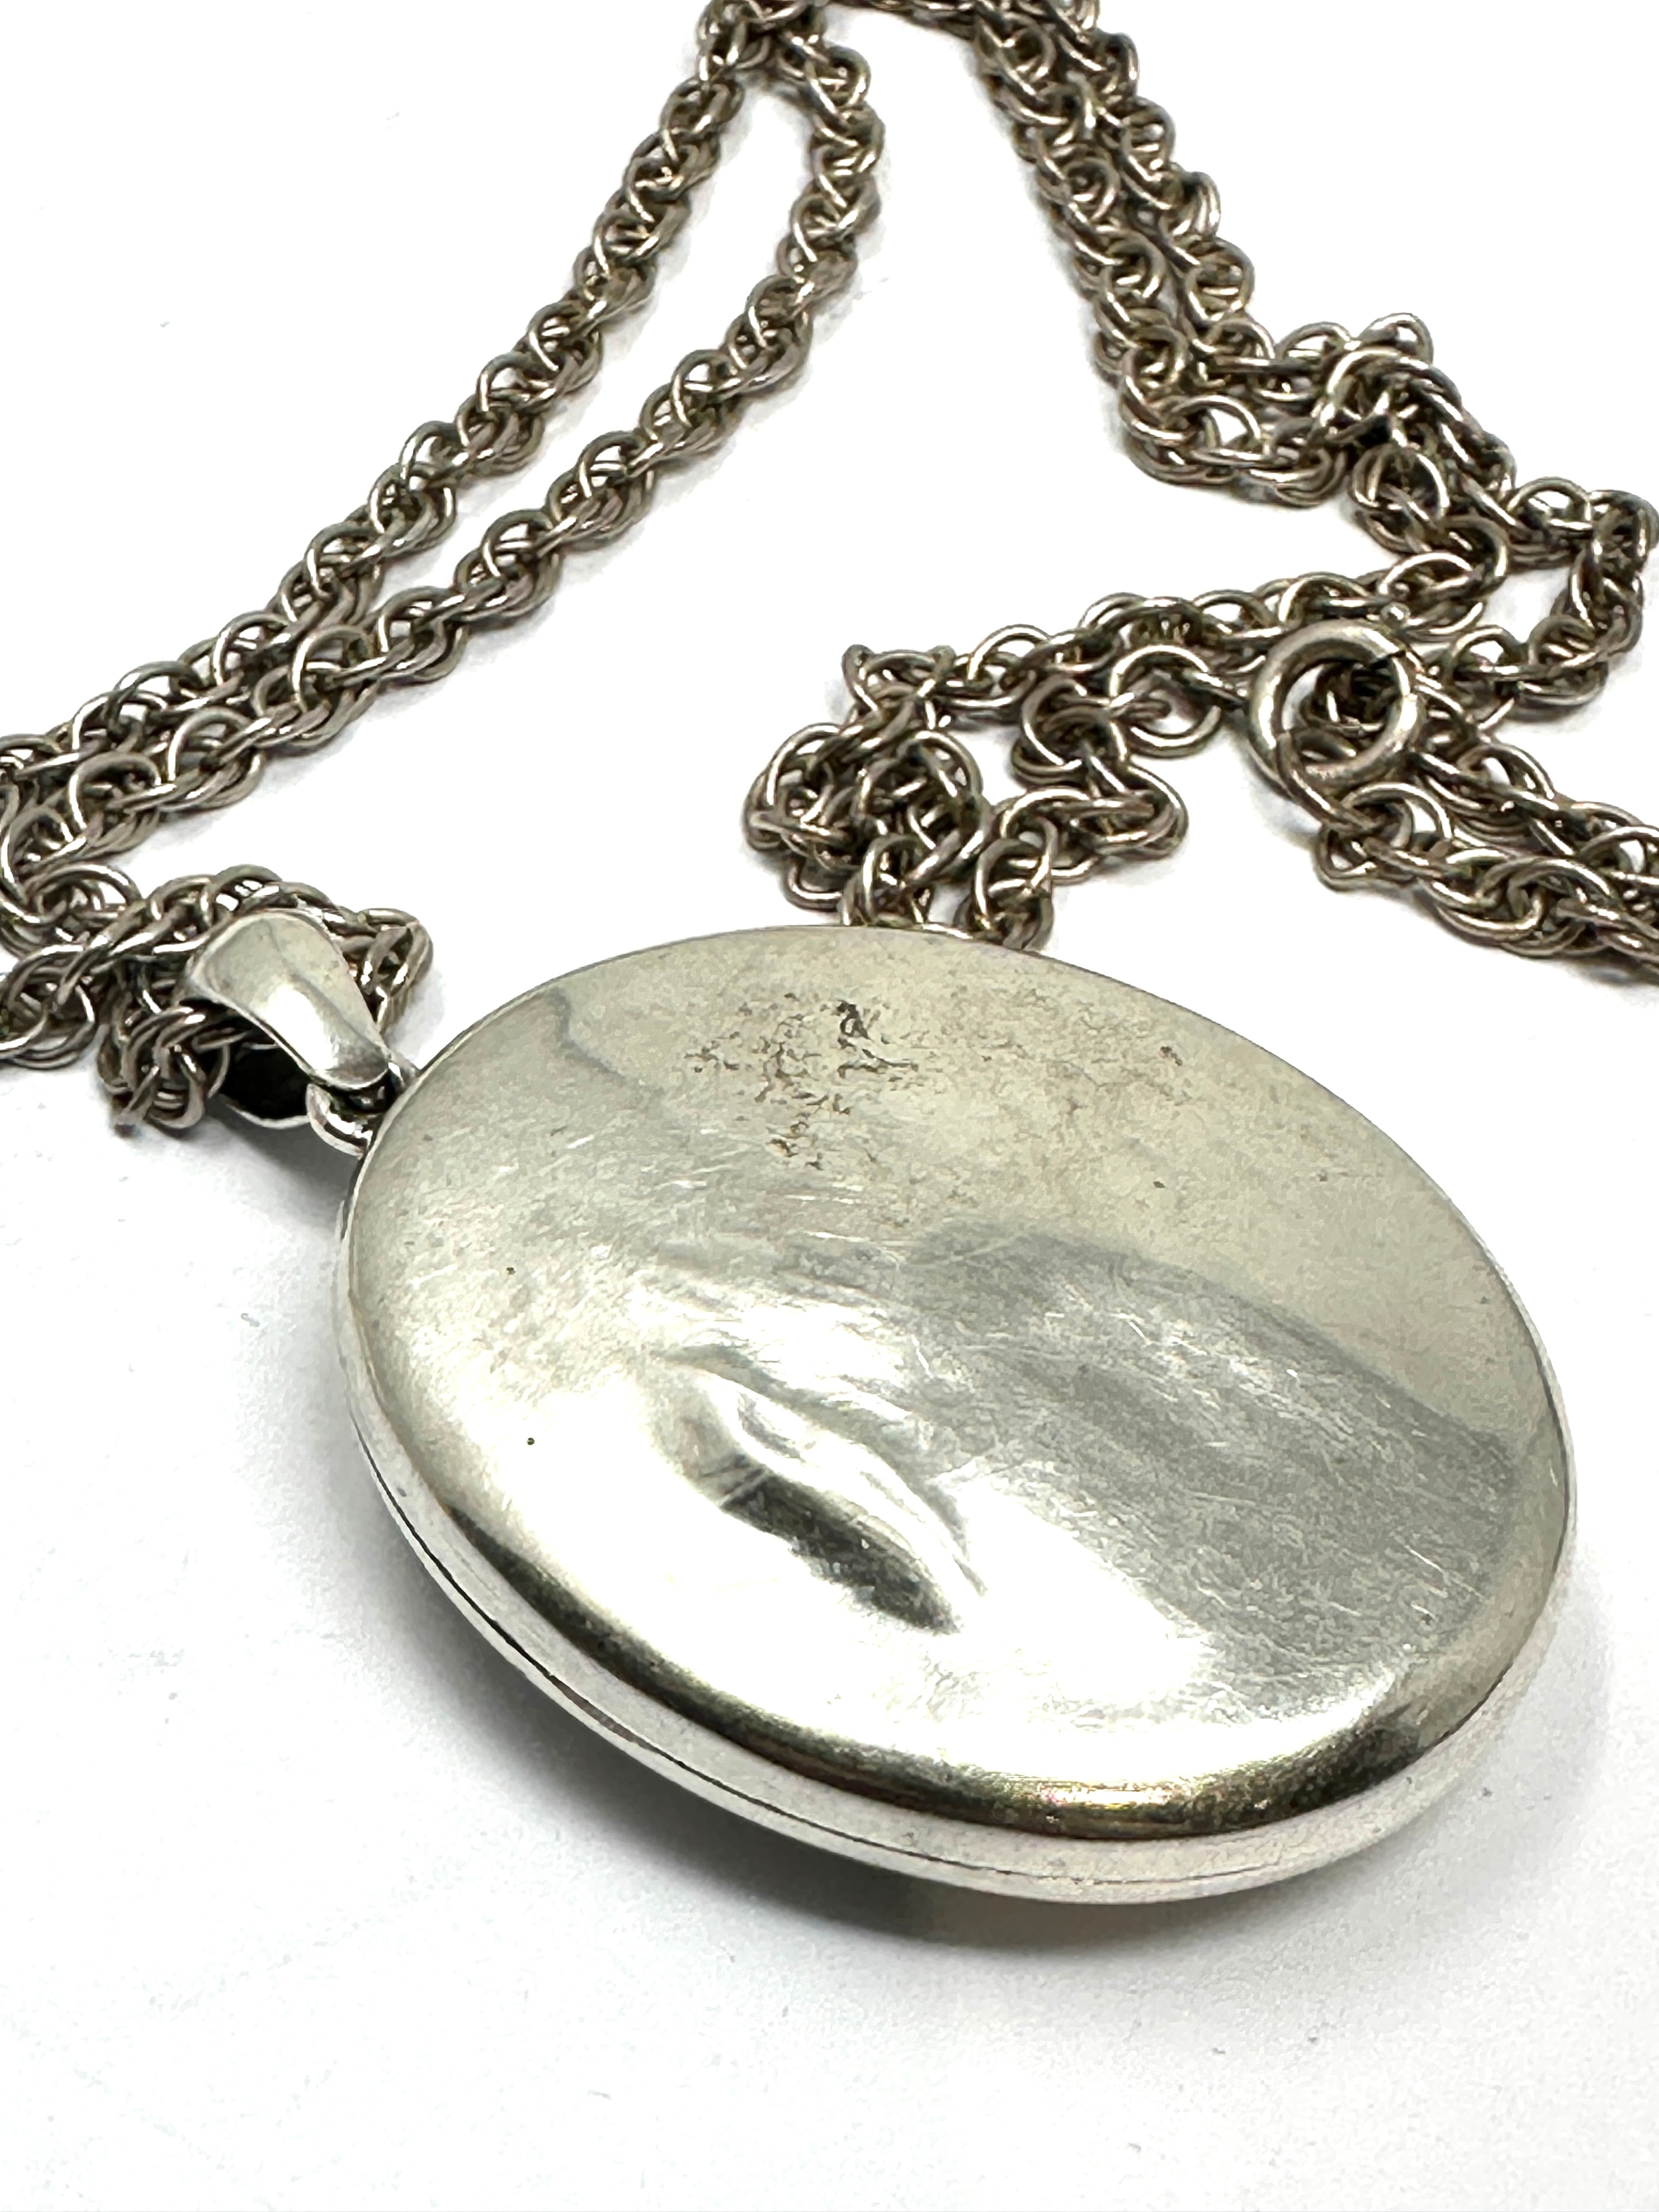 Large Vintage silver locket and chain weight 35g - Image 3 of 3